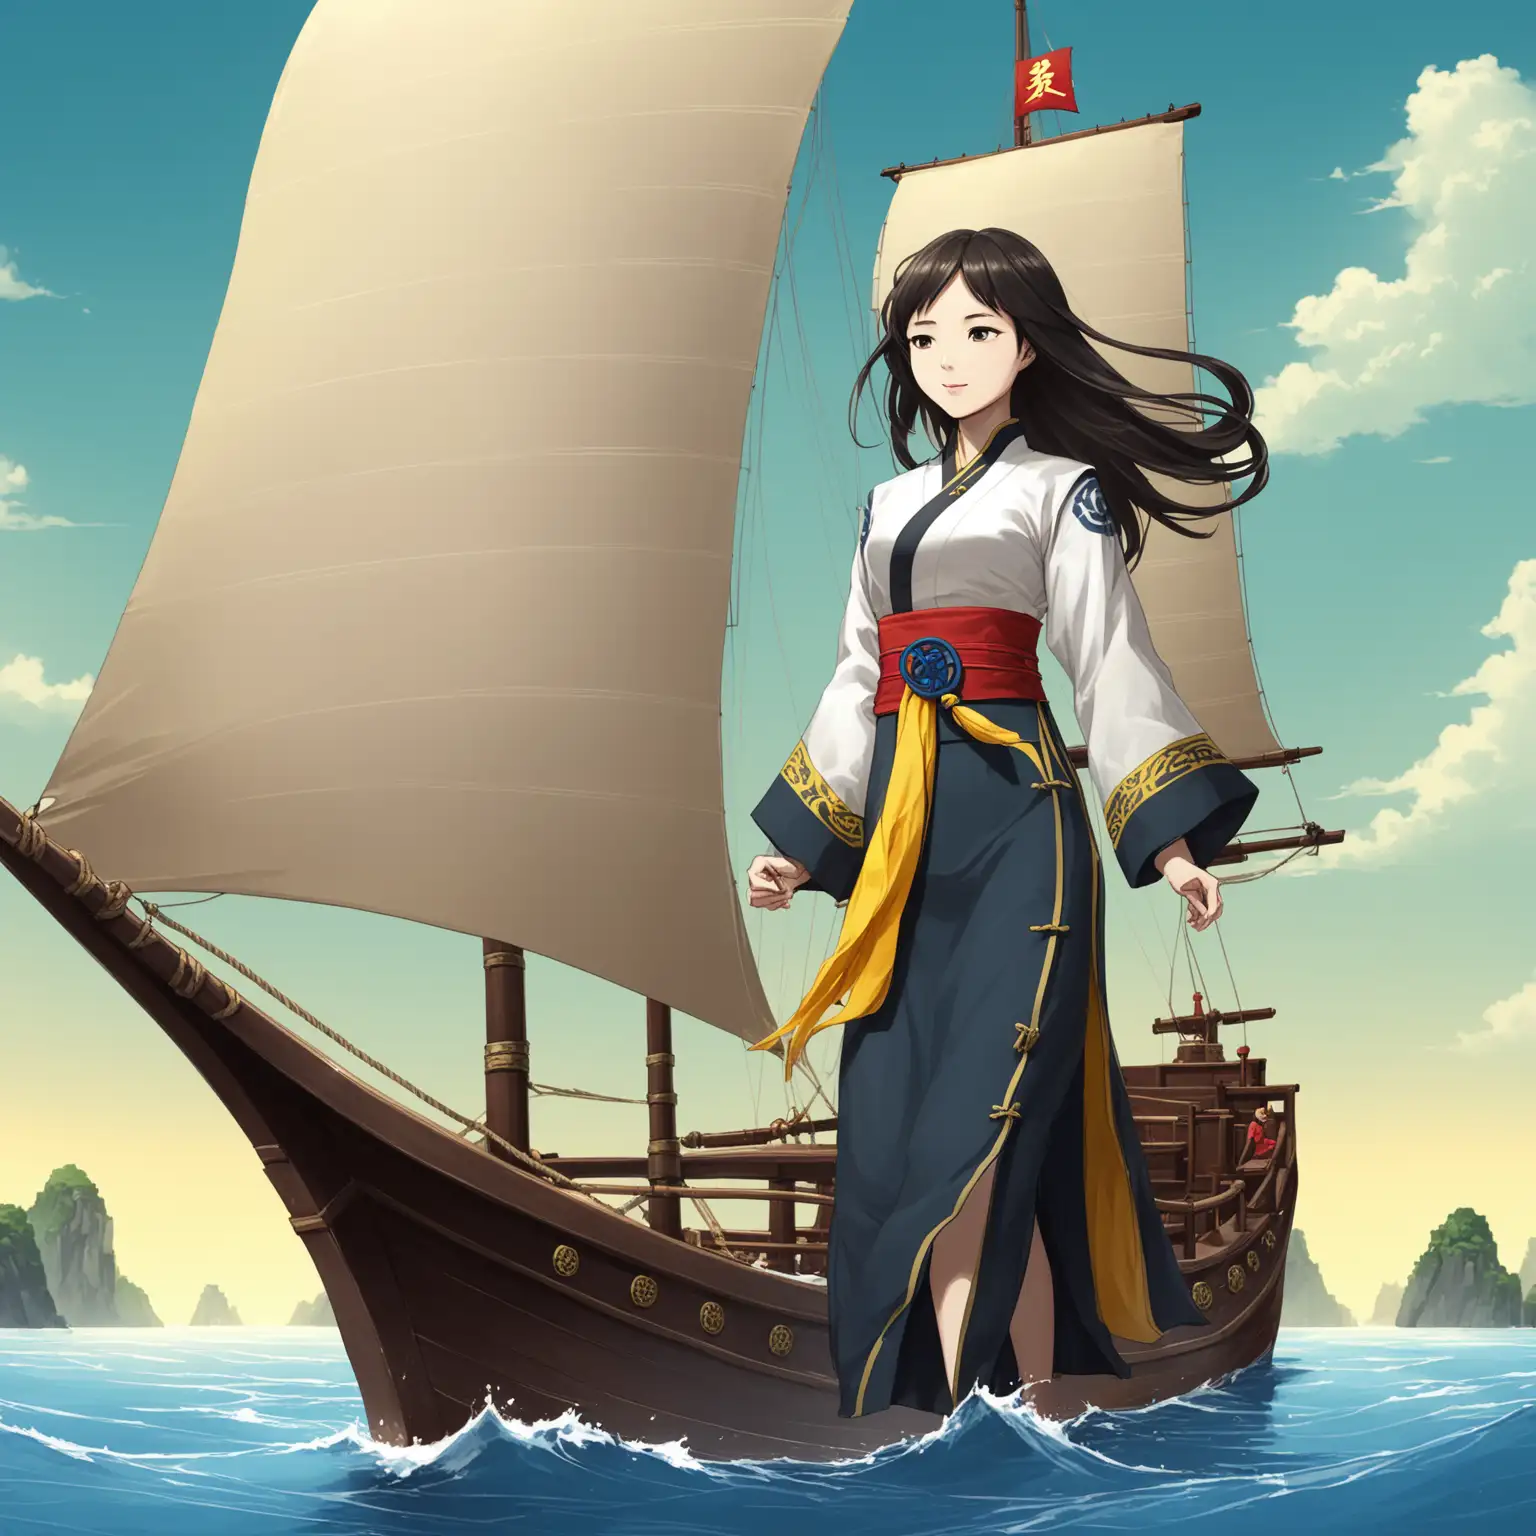 Yang-Fan-Sets-Sail-Illustration-of-a-Young-Adventurer-Embarking-on-a-Sea-Journey